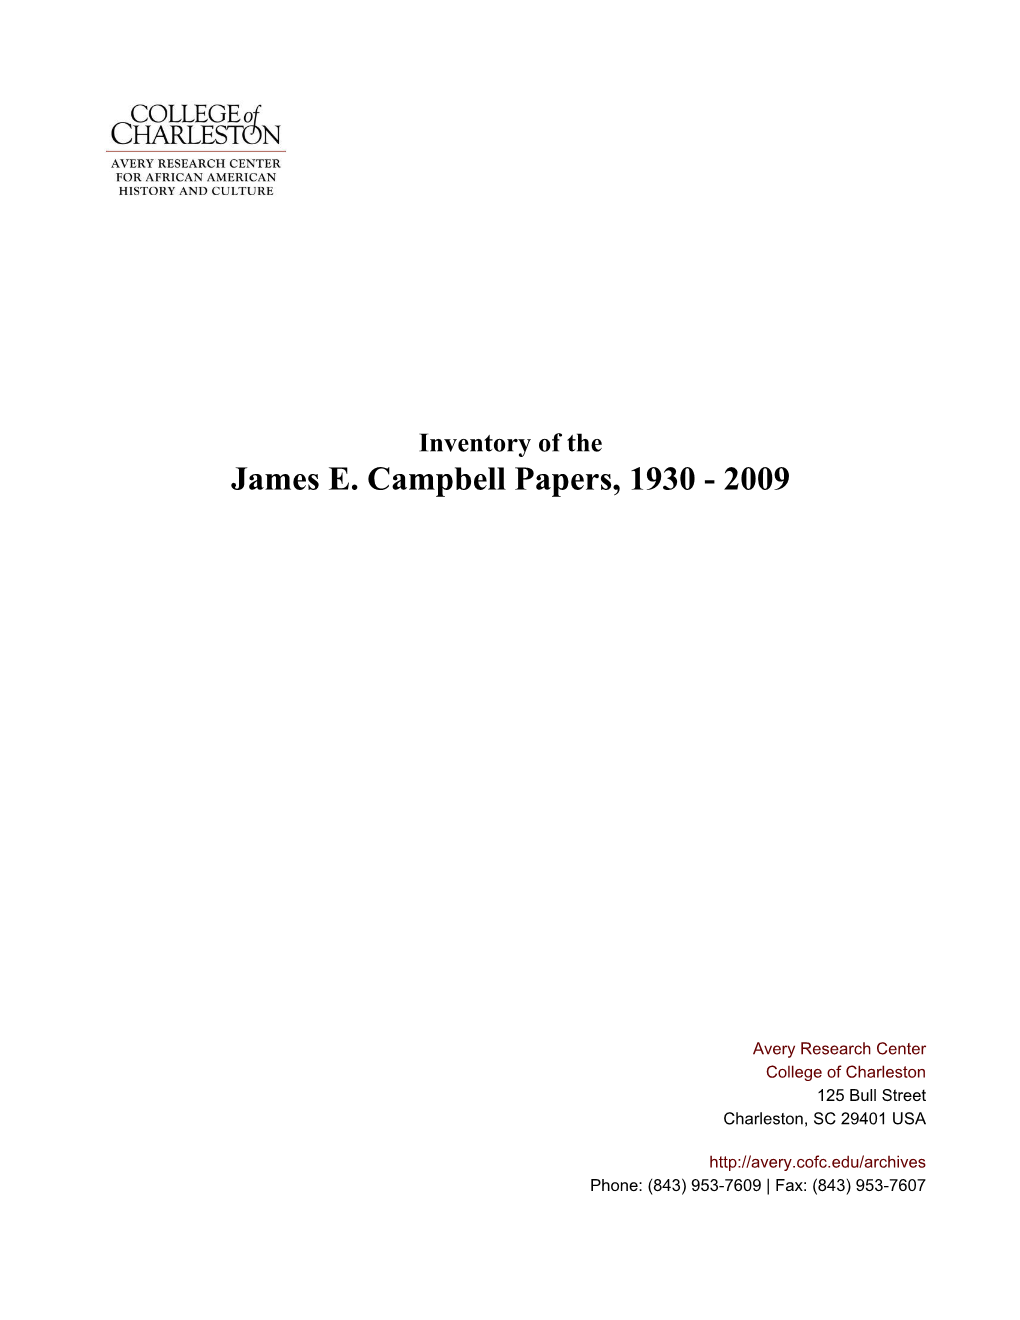 James E. Campbell Papers, 1930 - 2009